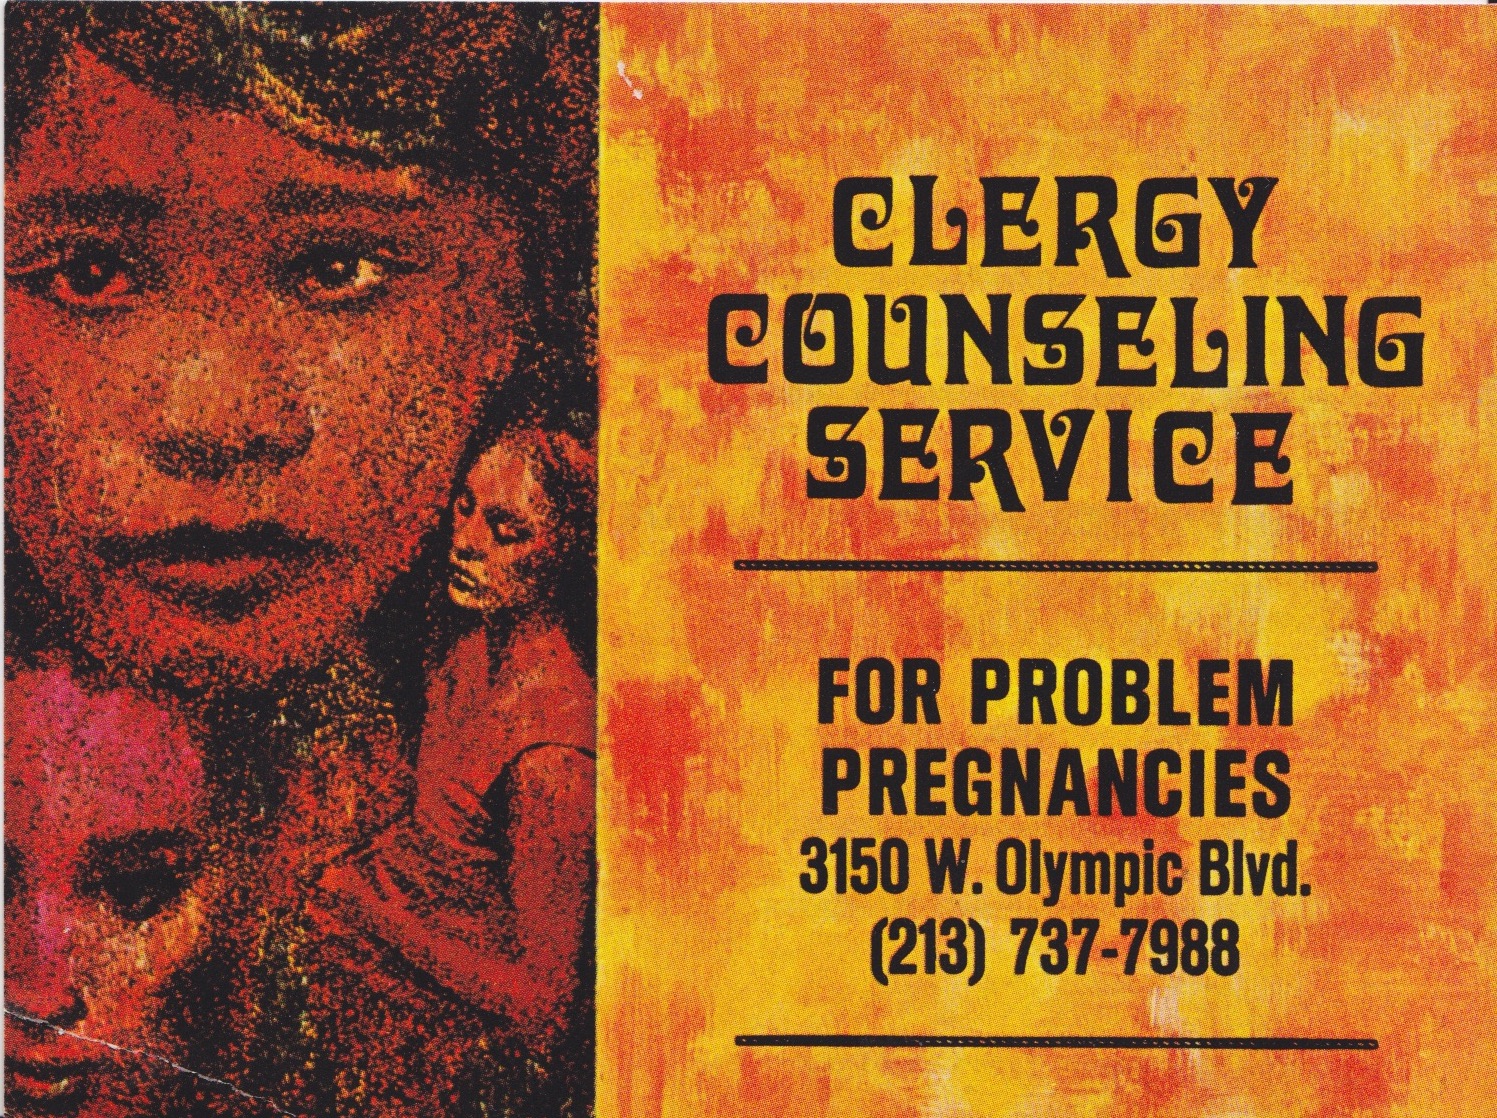 Los Angeles Clergy Counseling Service on Problem Pregnancies advertisement, circa 1969. Private collection of Gillian Frank.